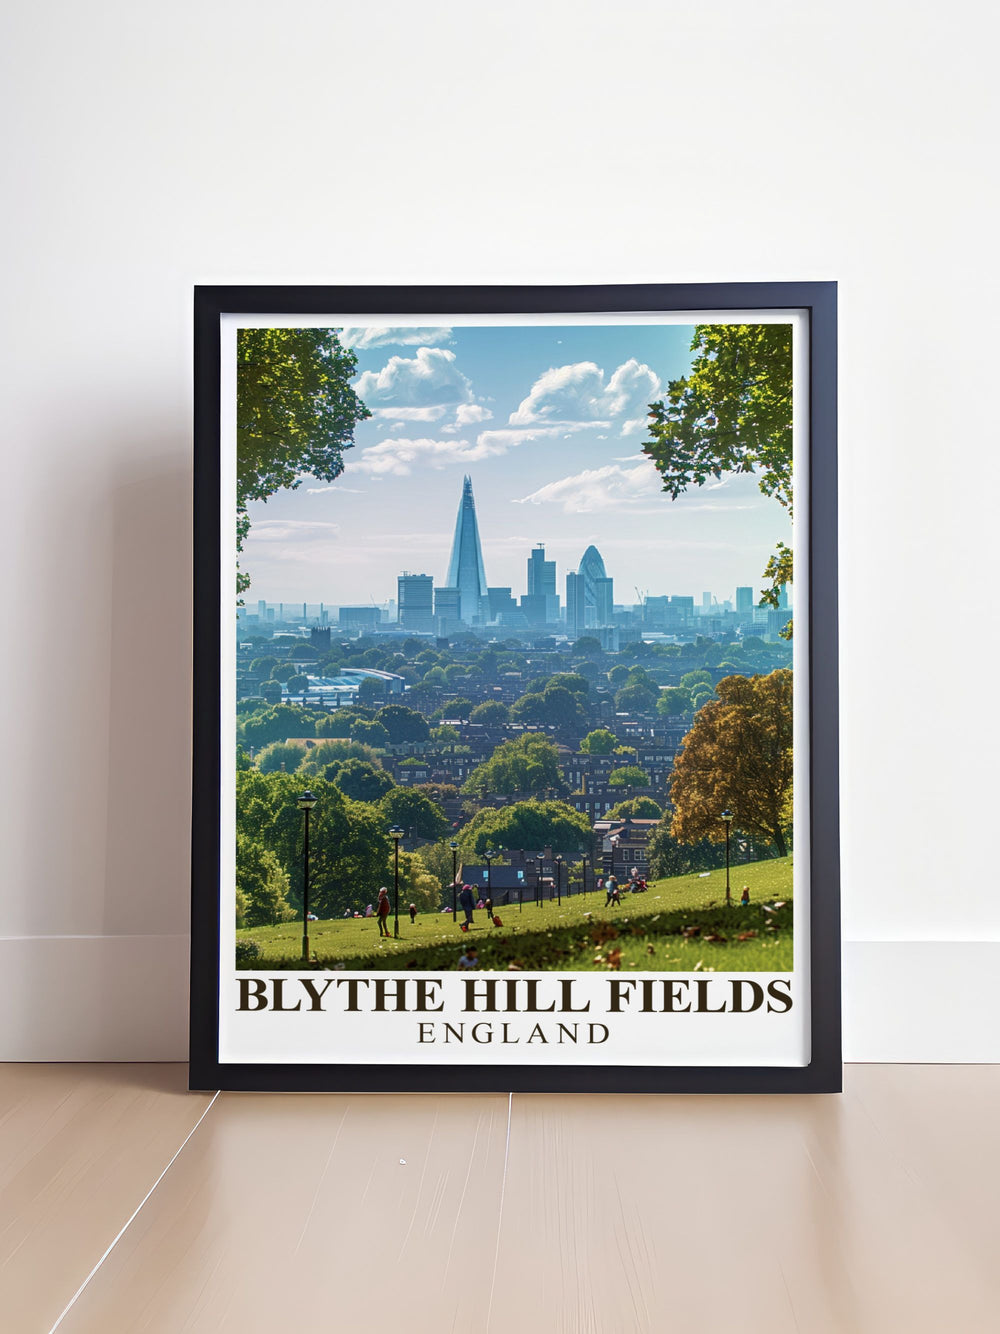 Showcasing the panoramic views of Londons skyline and the lush greenery of Blythe Hill Fields, this art print highlights one of Londons most treasured parks, perfect for adventure seekers and nature lovers.